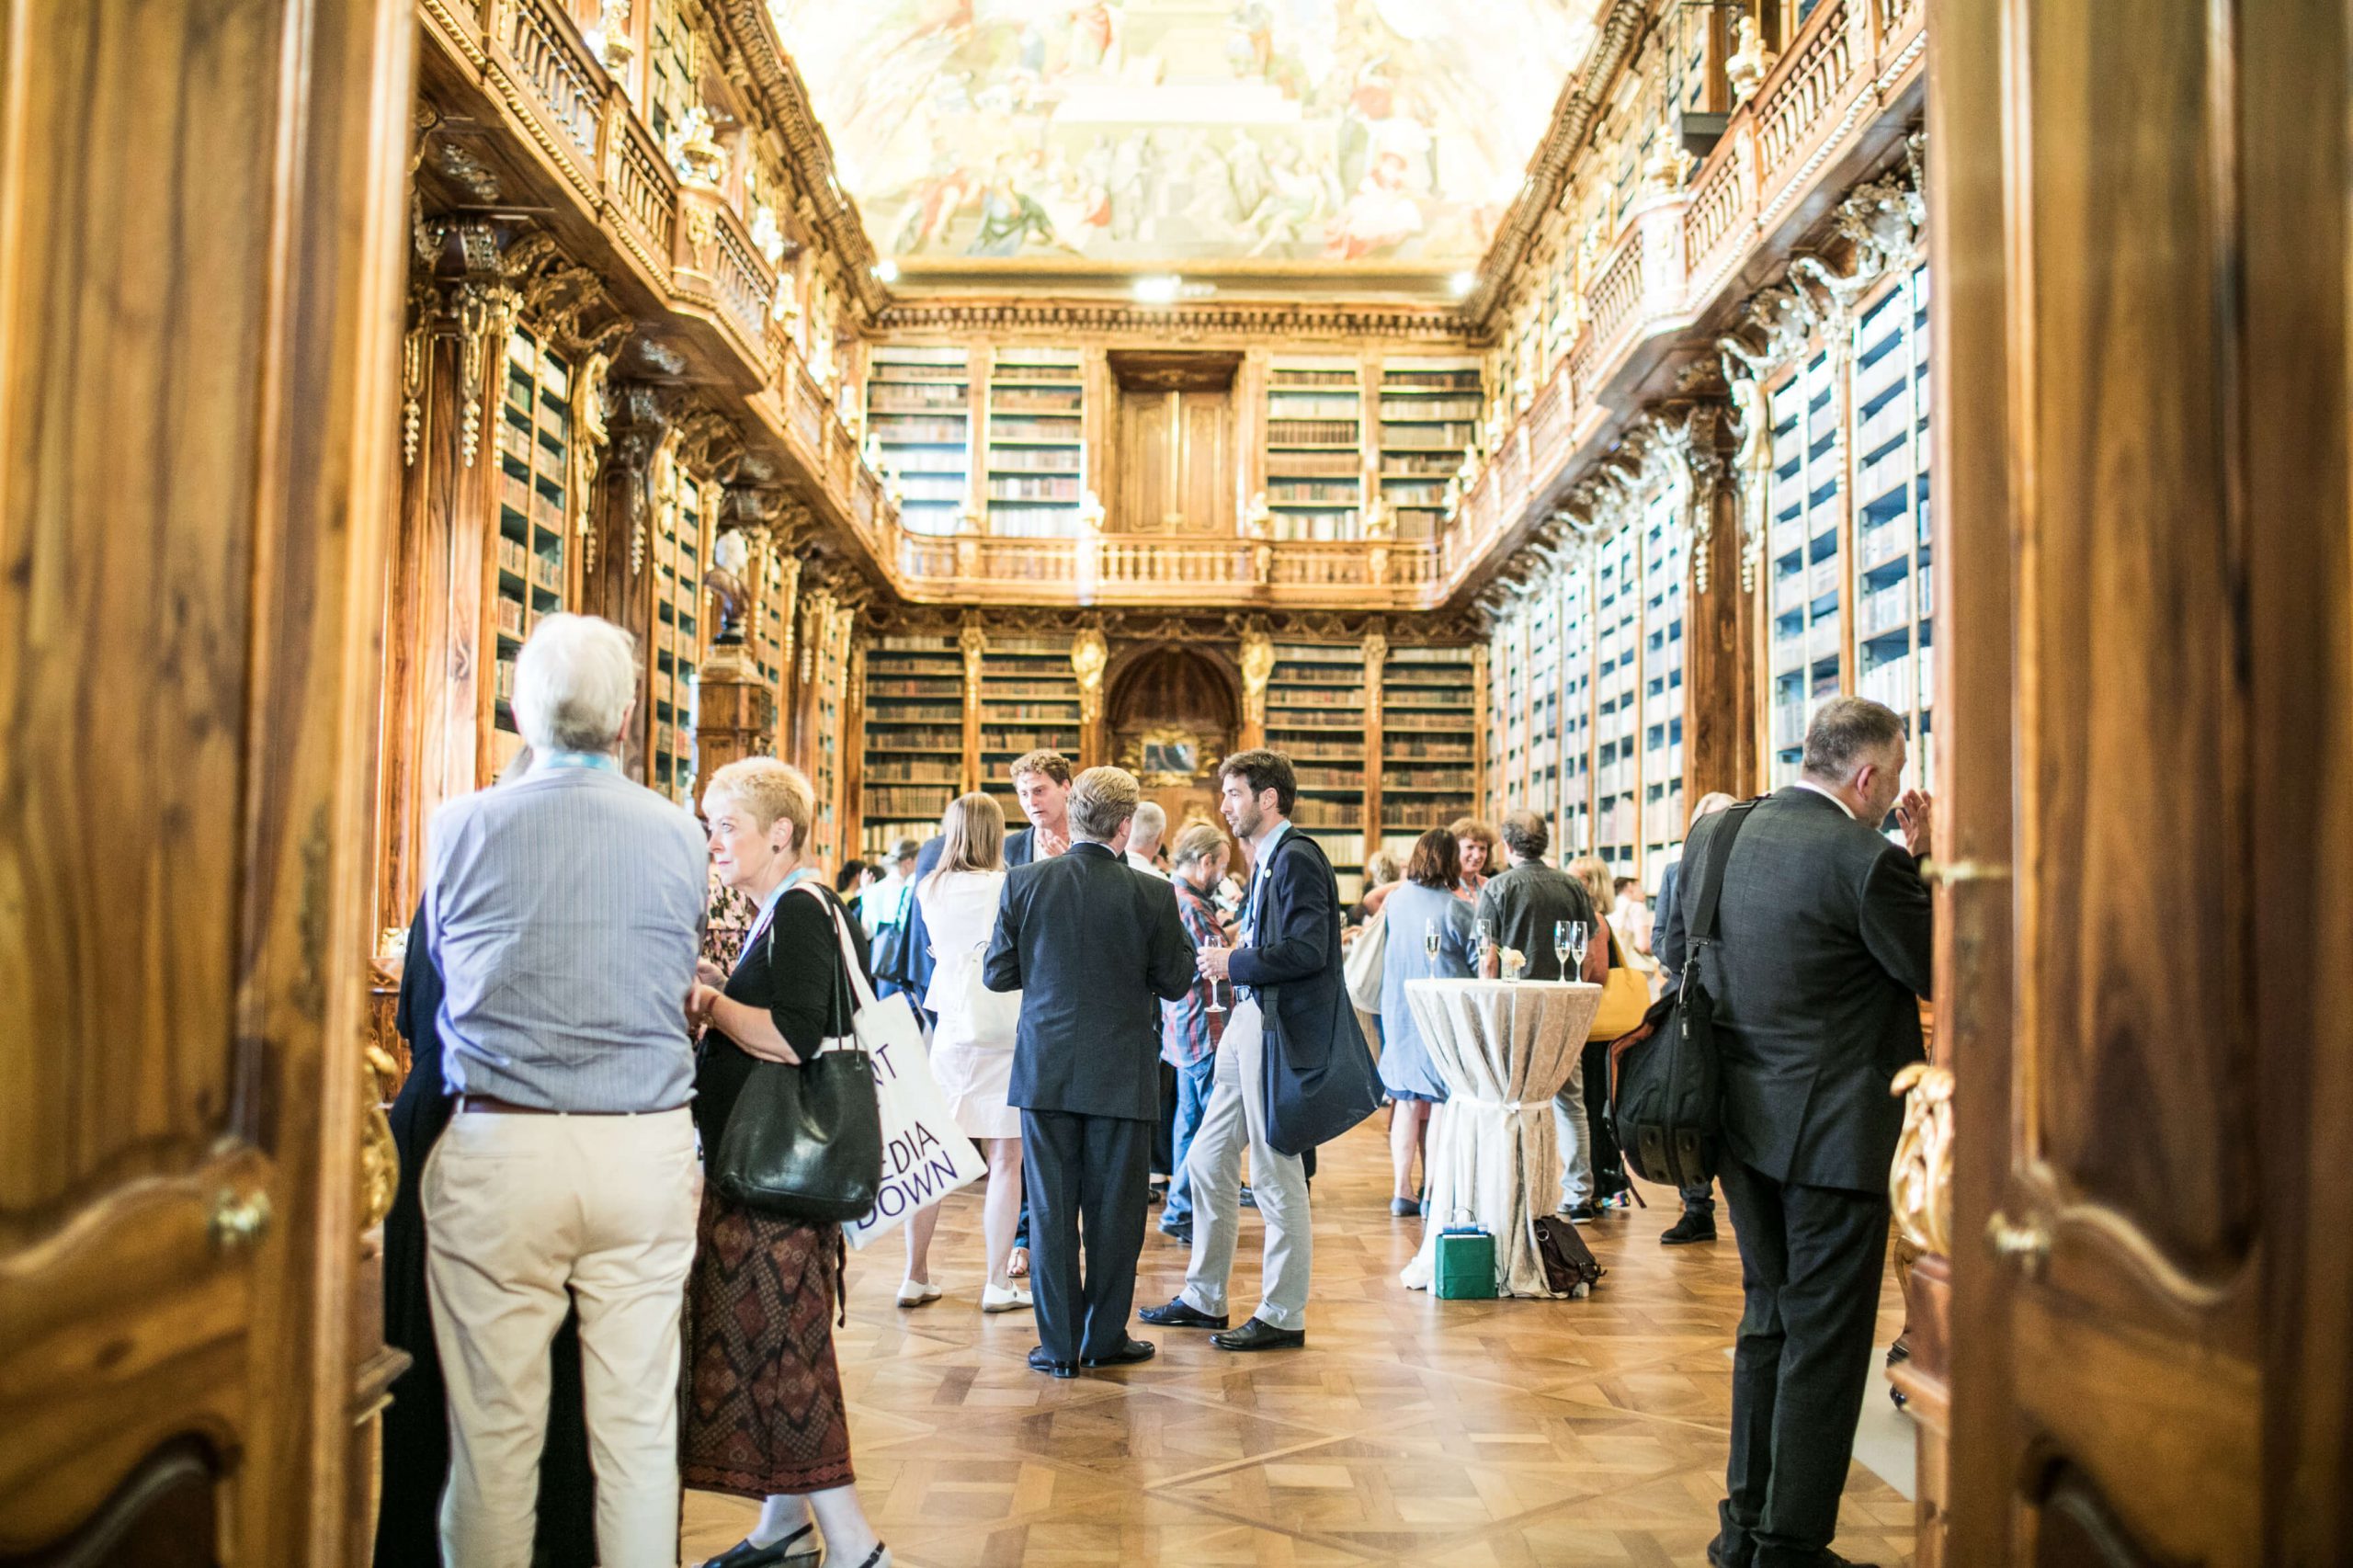 Picture of a grand library interior with groups of people talking